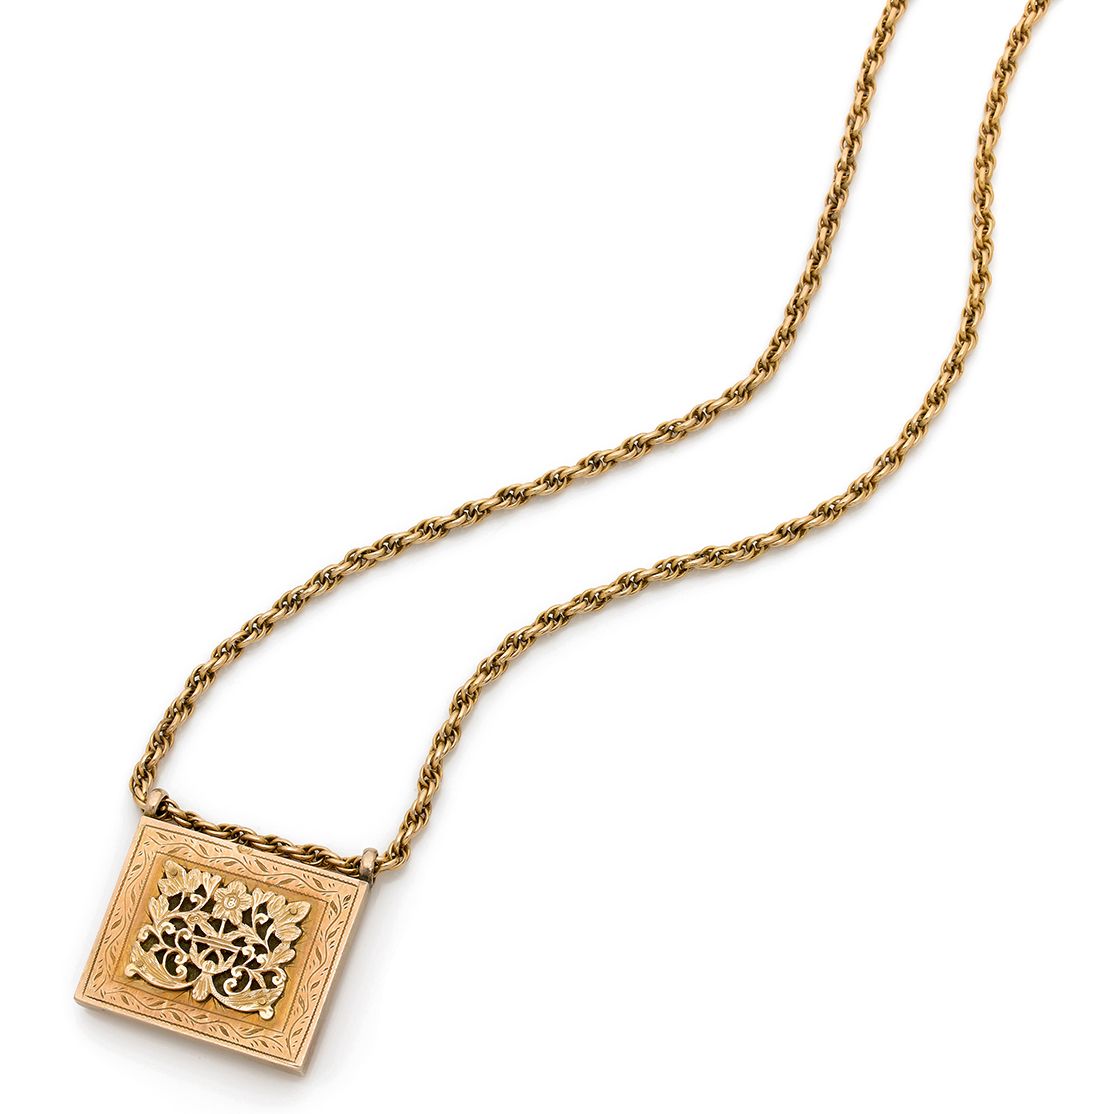 Null 
Necklace Quran holder rectangular shape gold 9k (375), applied with an ope&hellip;